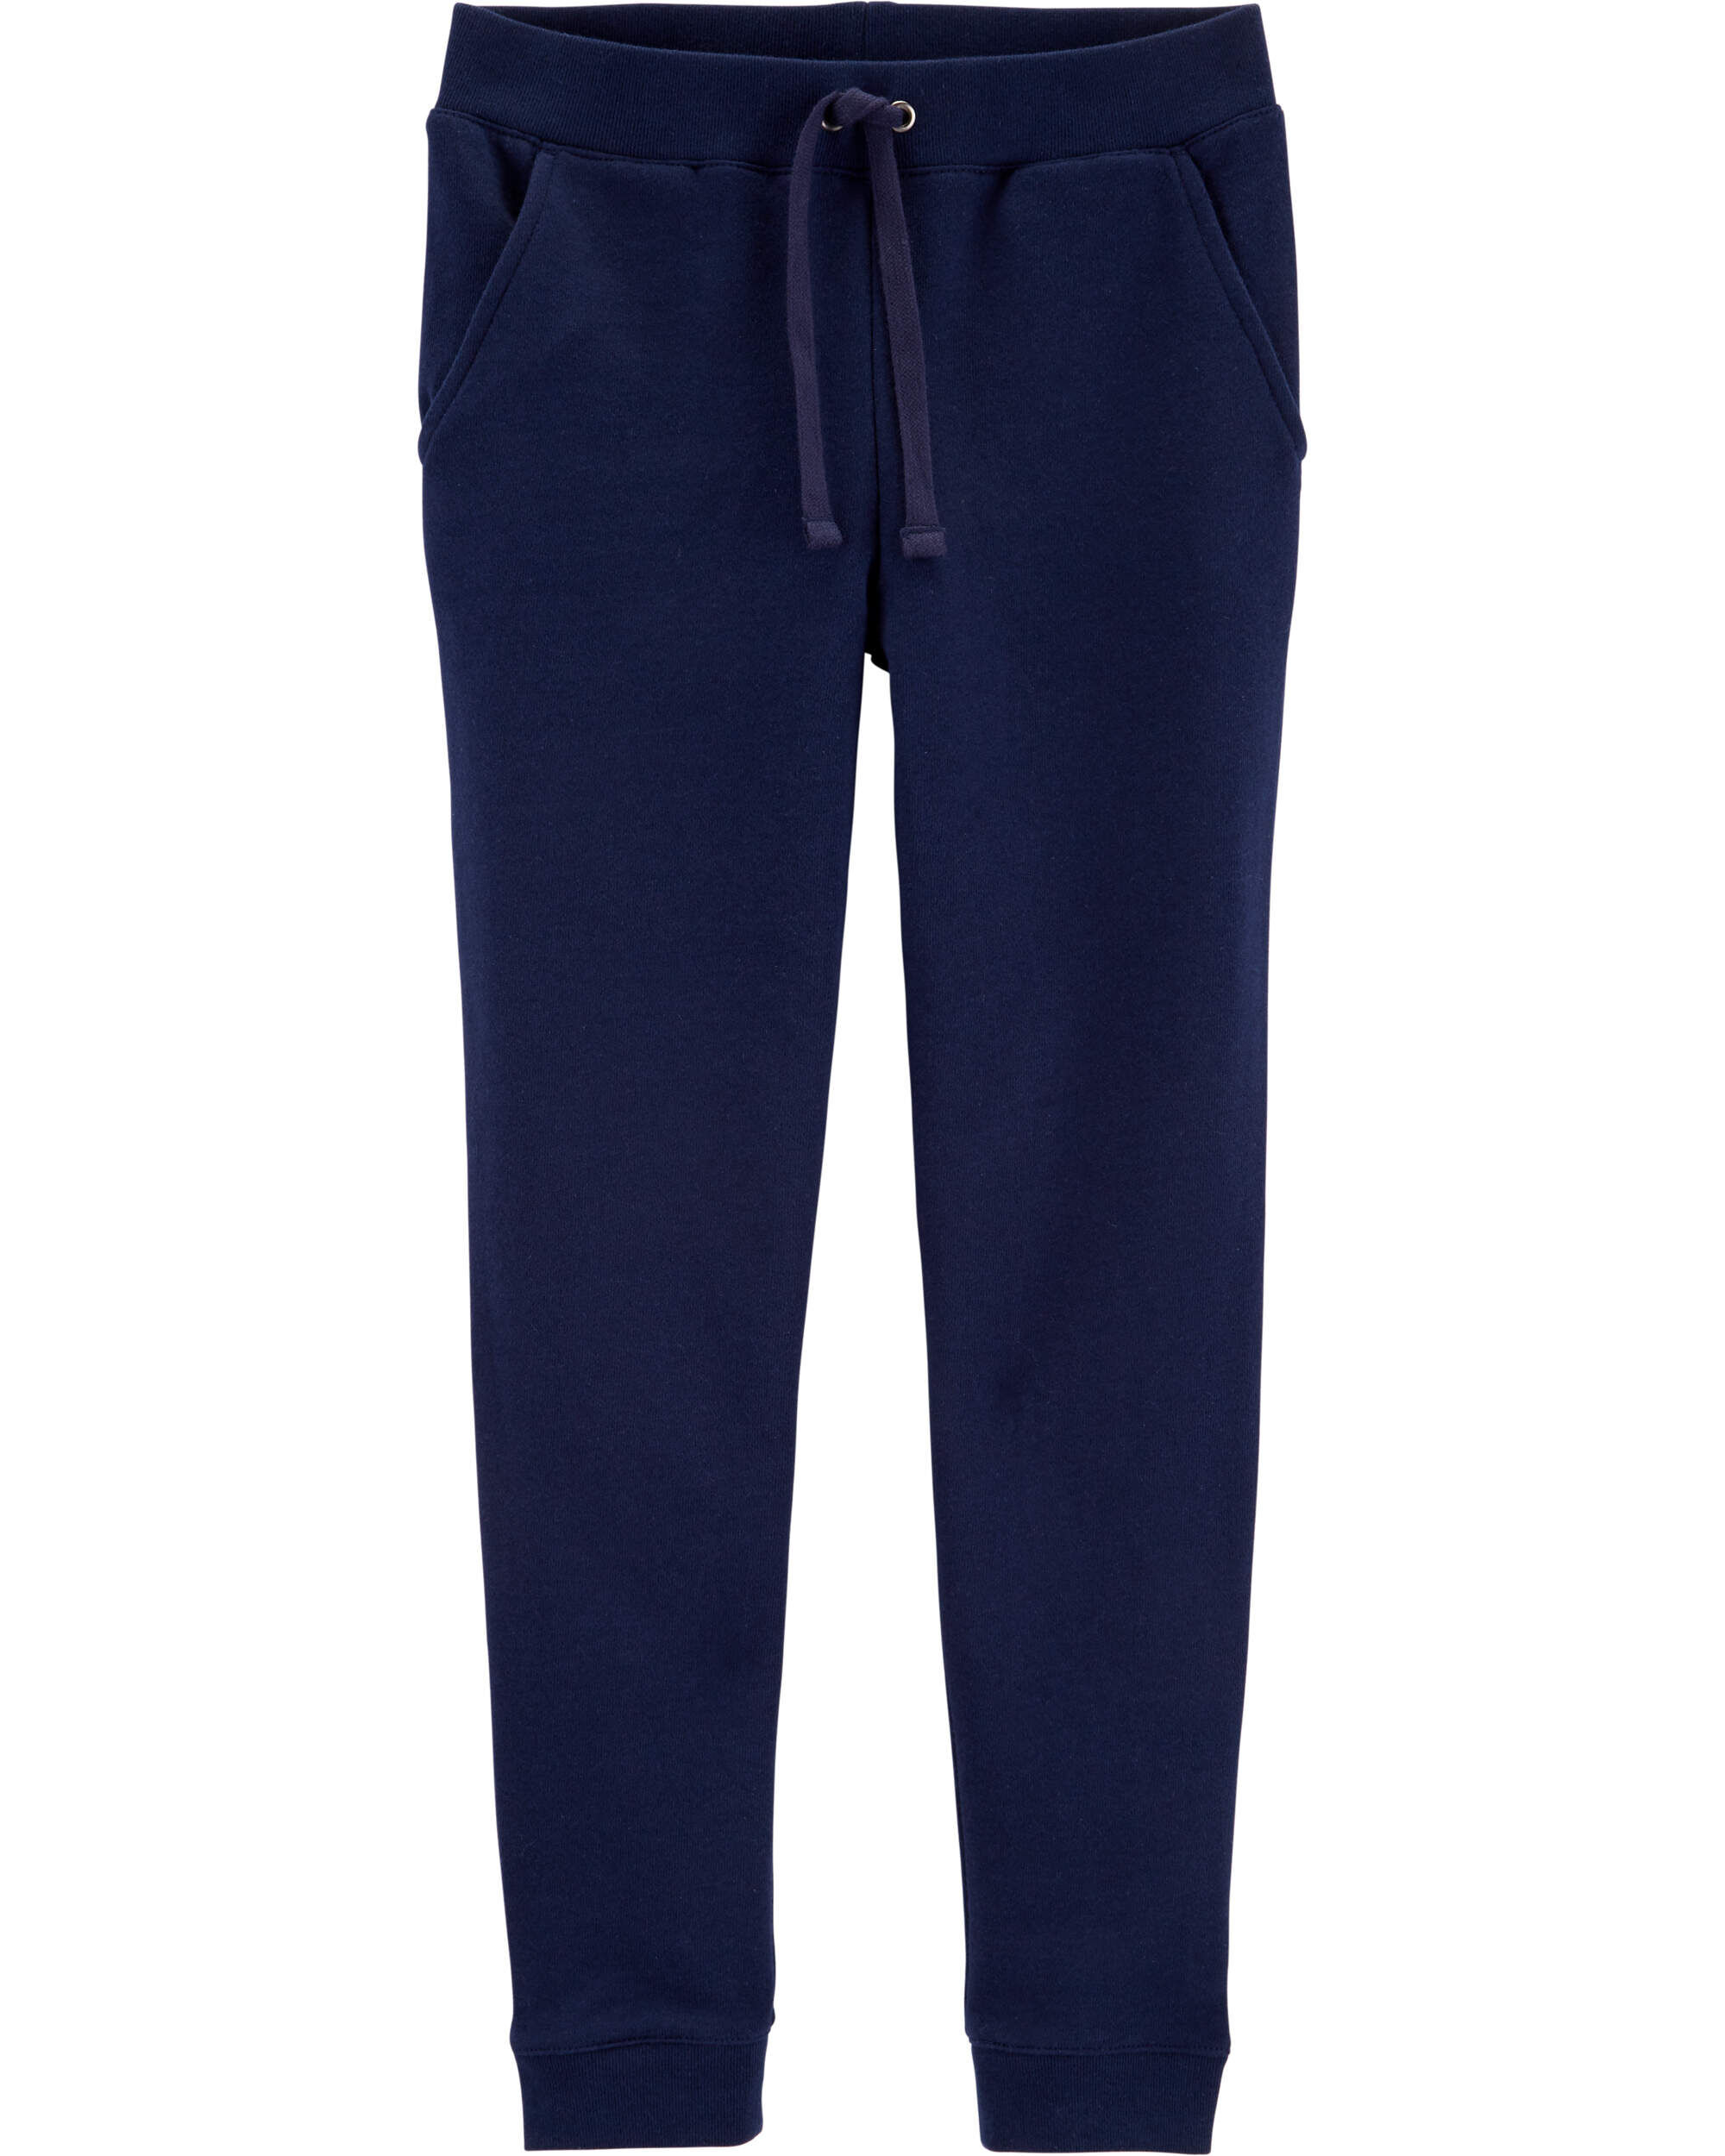 UNACOO Girls Soft Sweatpants French Terry Pull-on Joggers